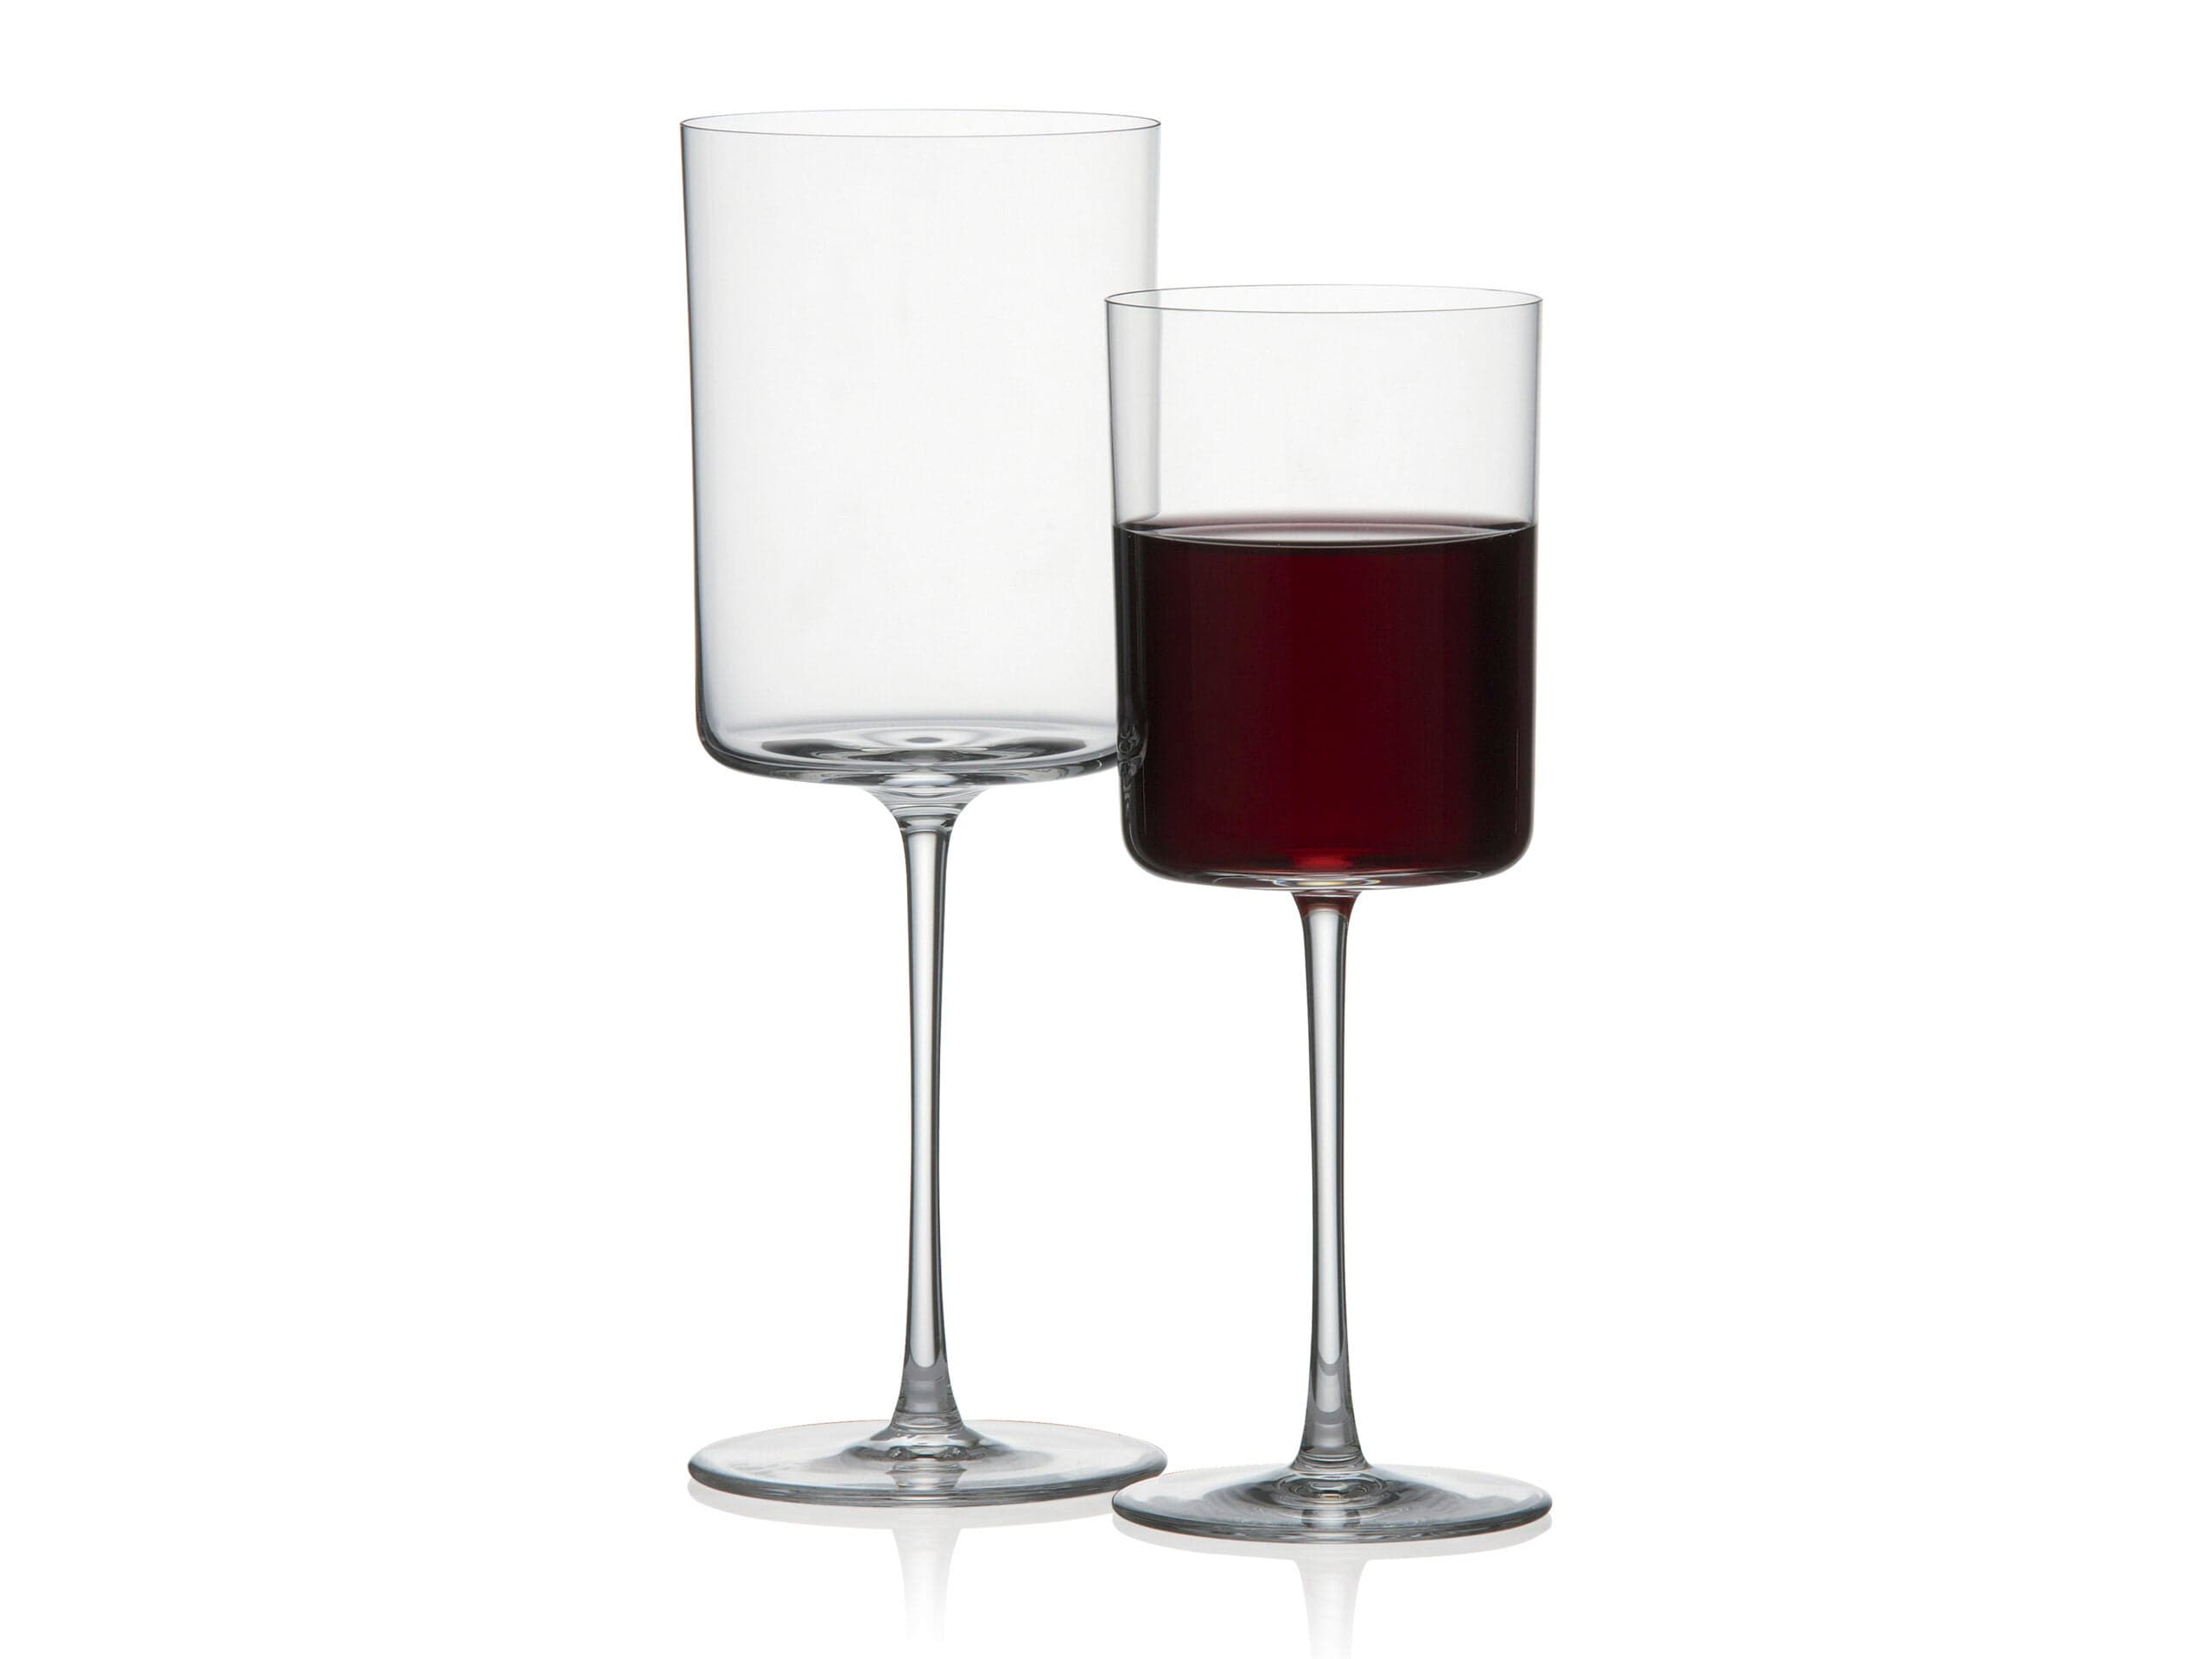 New wine glass design from Crate & Barrel